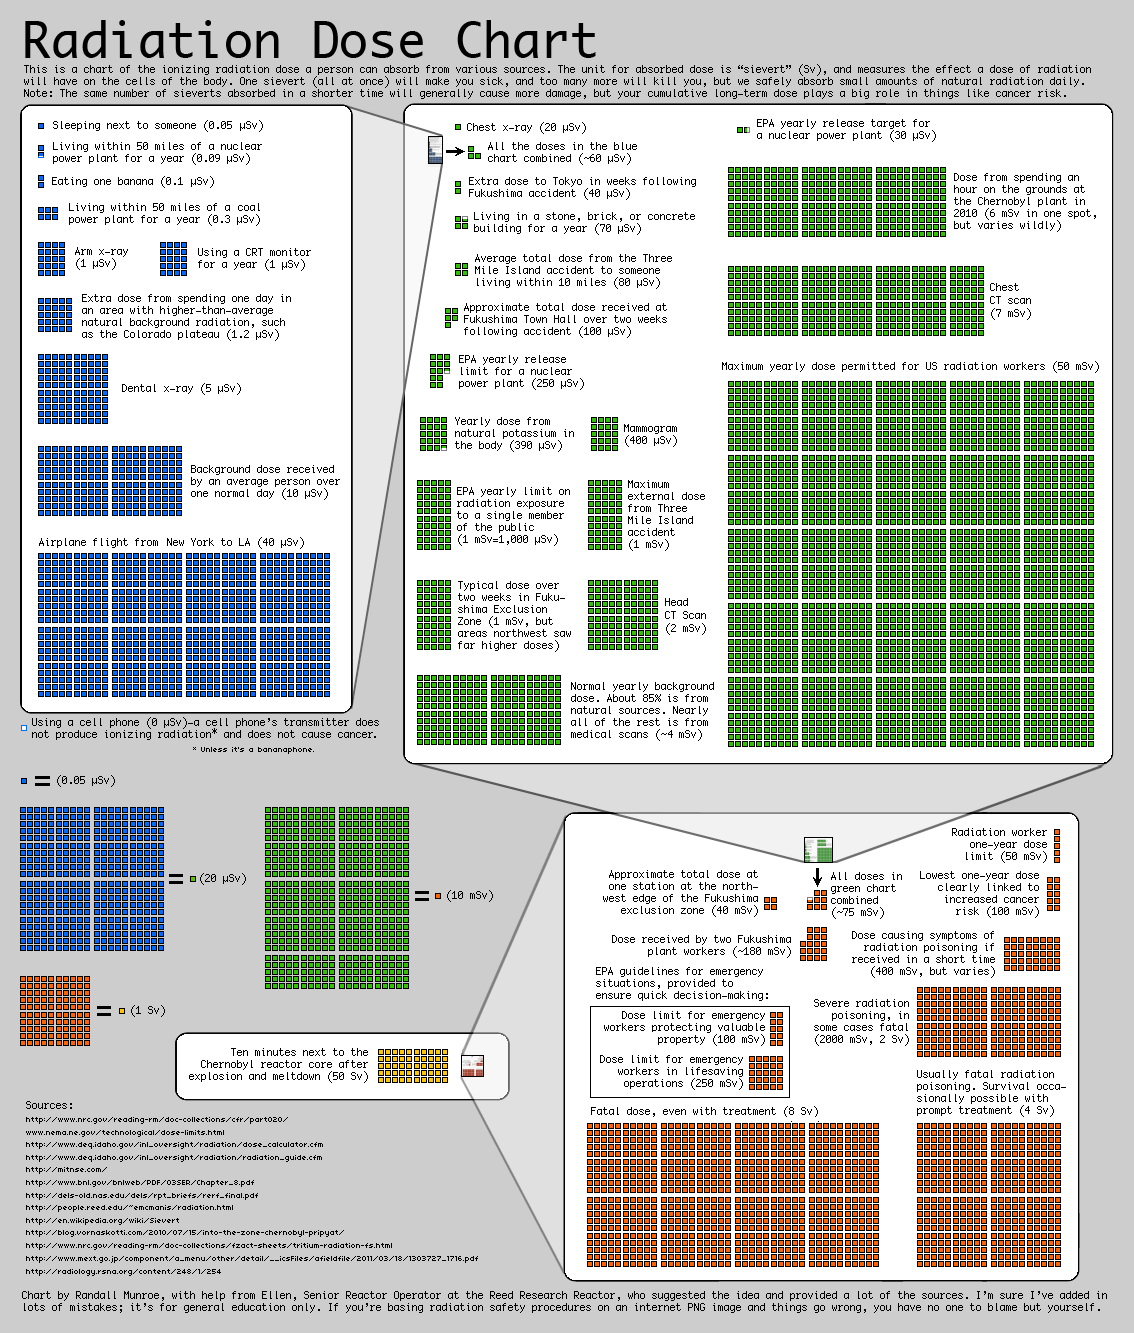 XKCD infographic about radiation dose